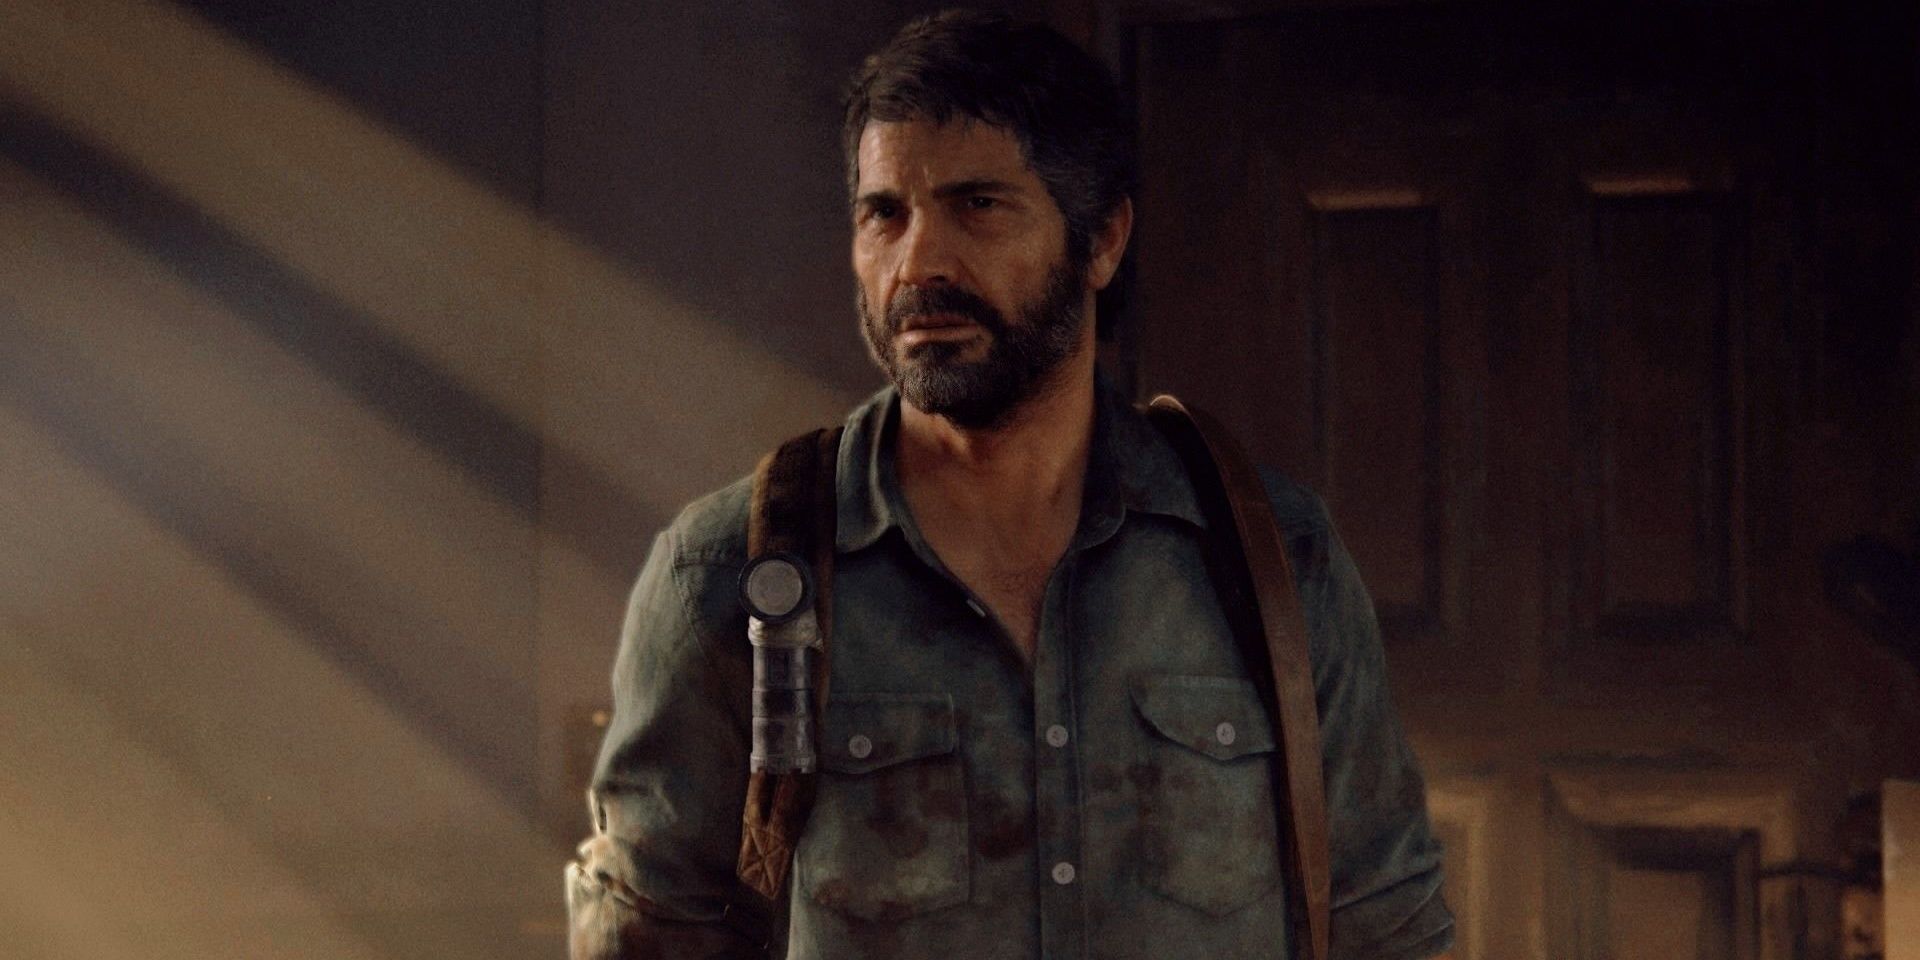 Joel miller in a shadowy room from The Last of Us.